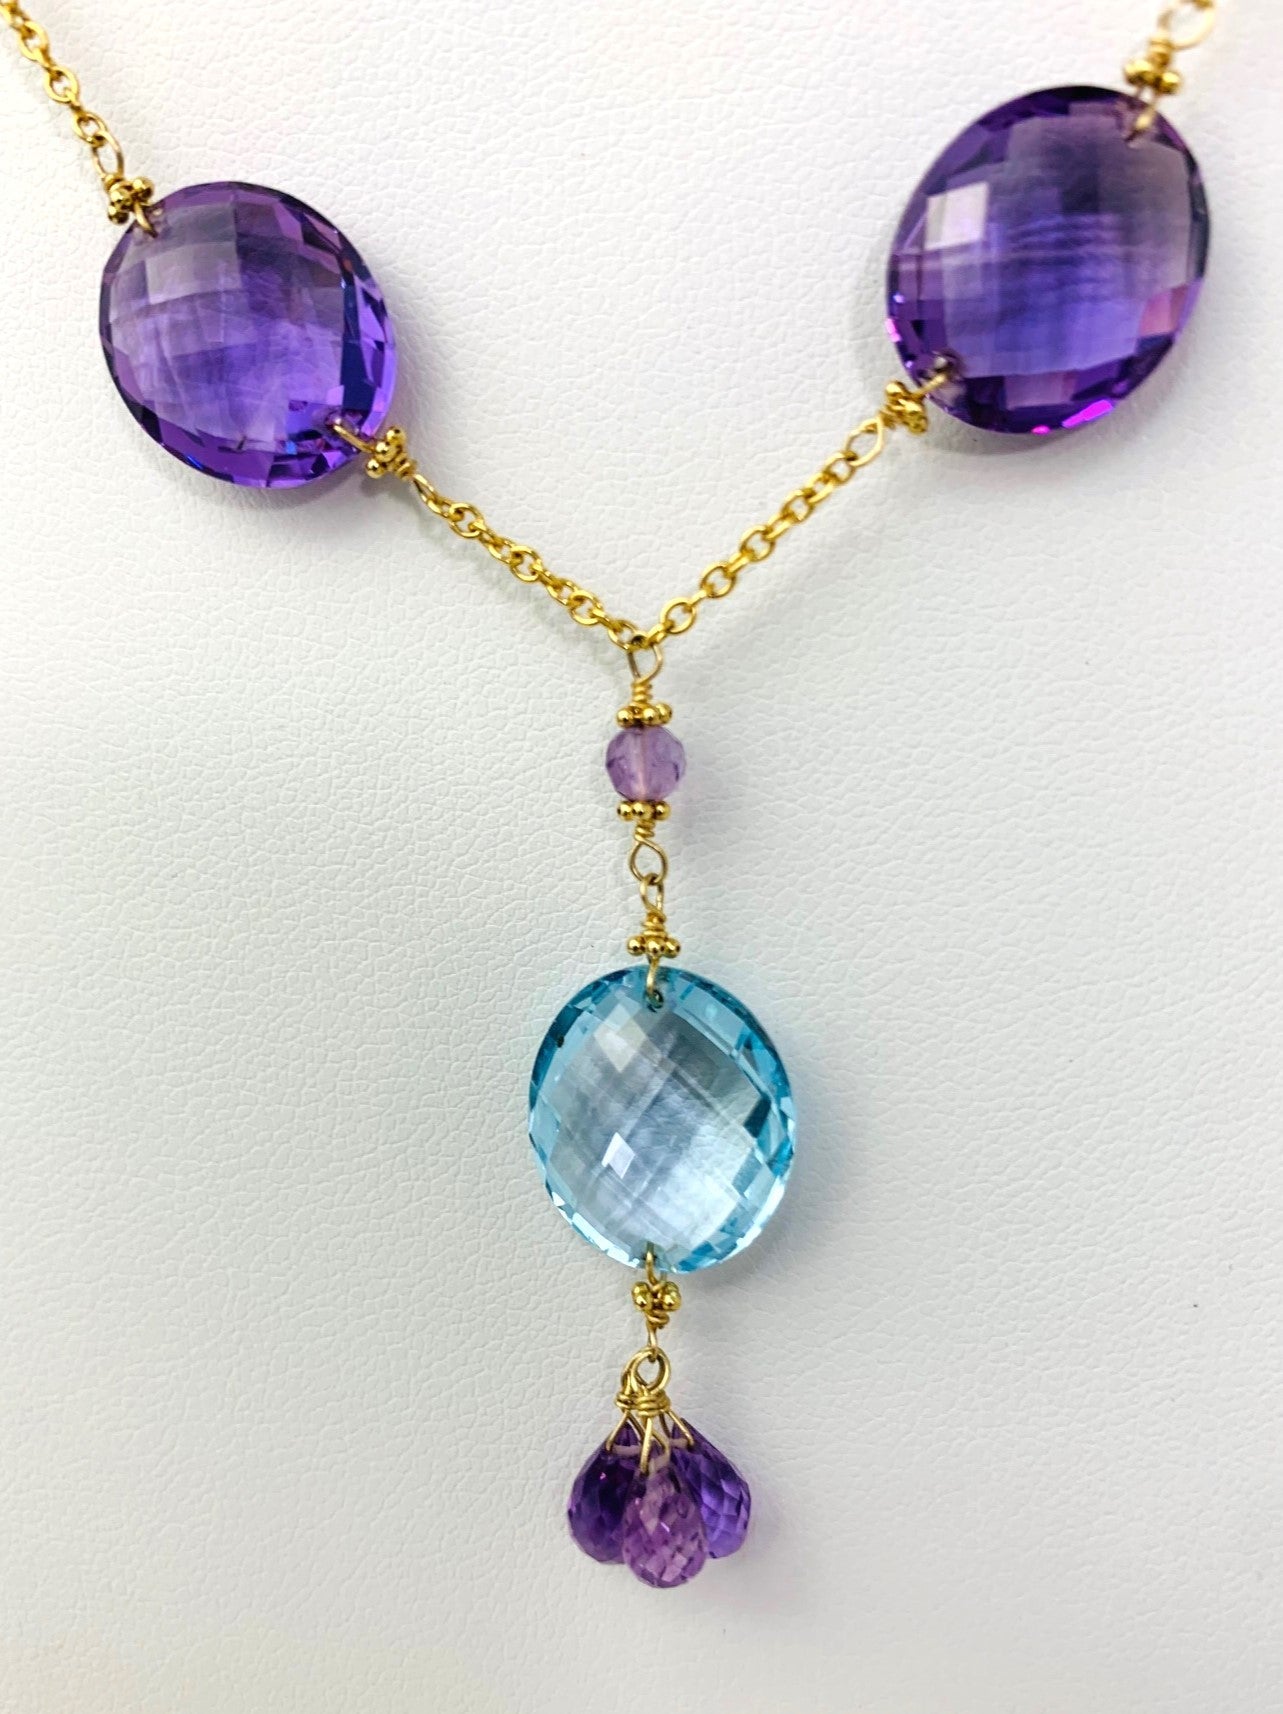 Clearance Sale! - 17-18" Blue Topaz And Amethyst Station Necklace With Oval Checkerboard And 3 Briolette Tassel Drop in 14KY - NCK-377-TASTNCGM14Y-BTAMY-18